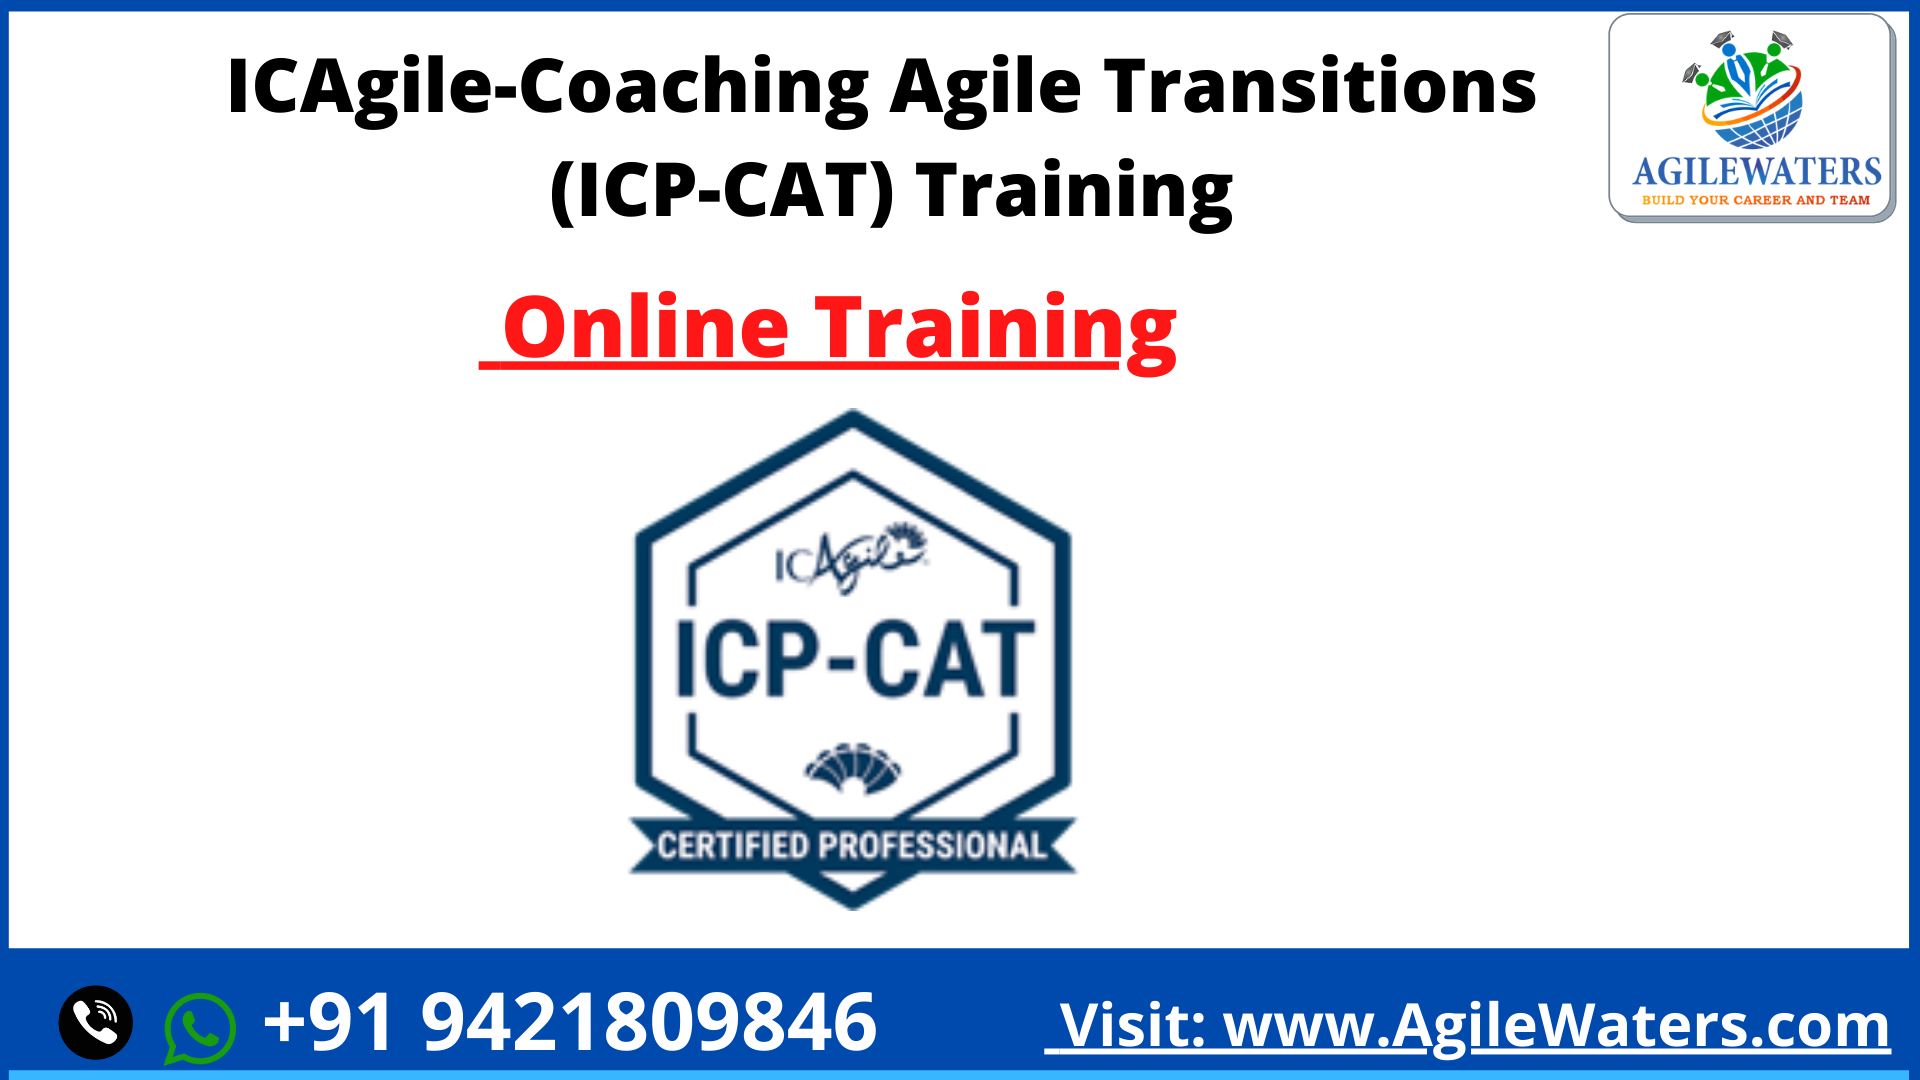 ICAgile-Coaching Agile Transitions (ICP-CAT)certificationEducation and LearningProfessional CoursesNoidaNoida Sector 10